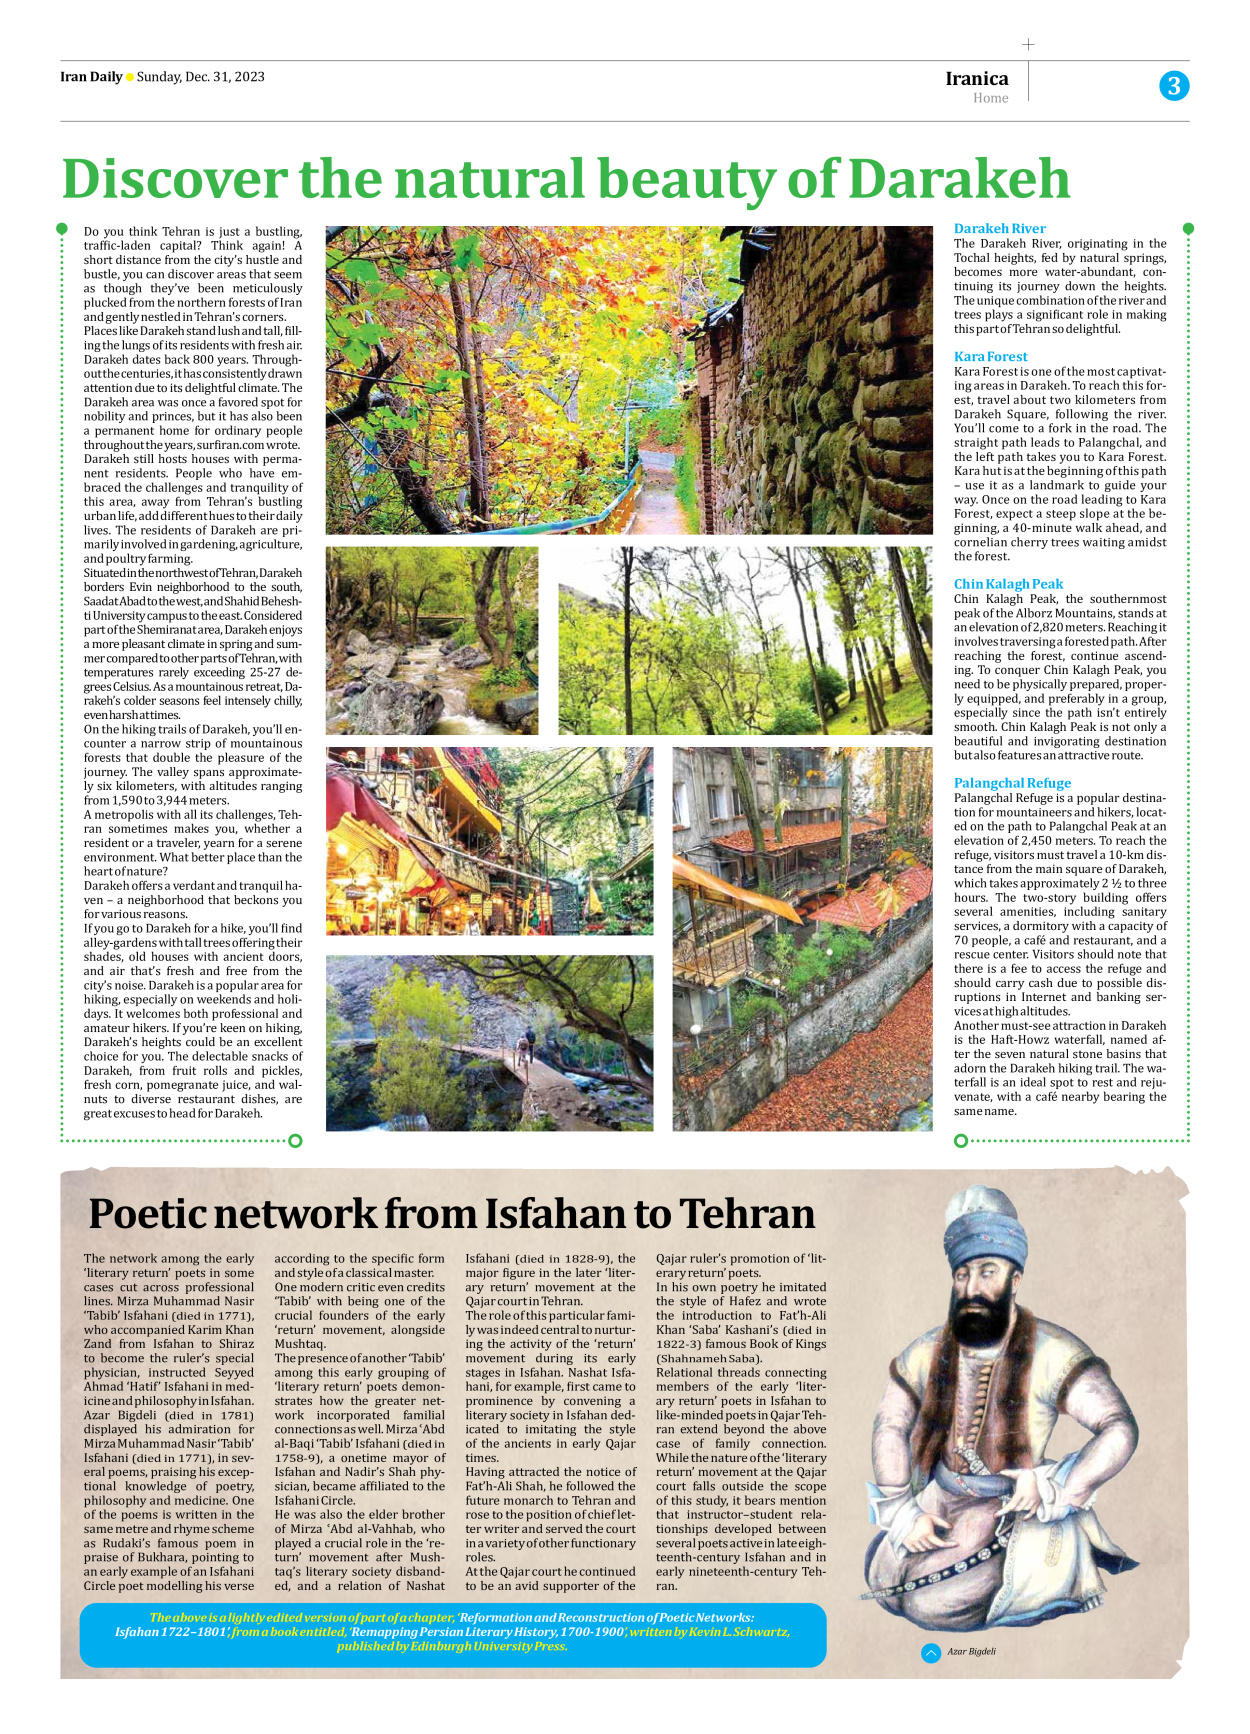 Iran Daily - Number Seven Thousand Four Hundred and Seventy Two - 31 December 2023 - Page 3